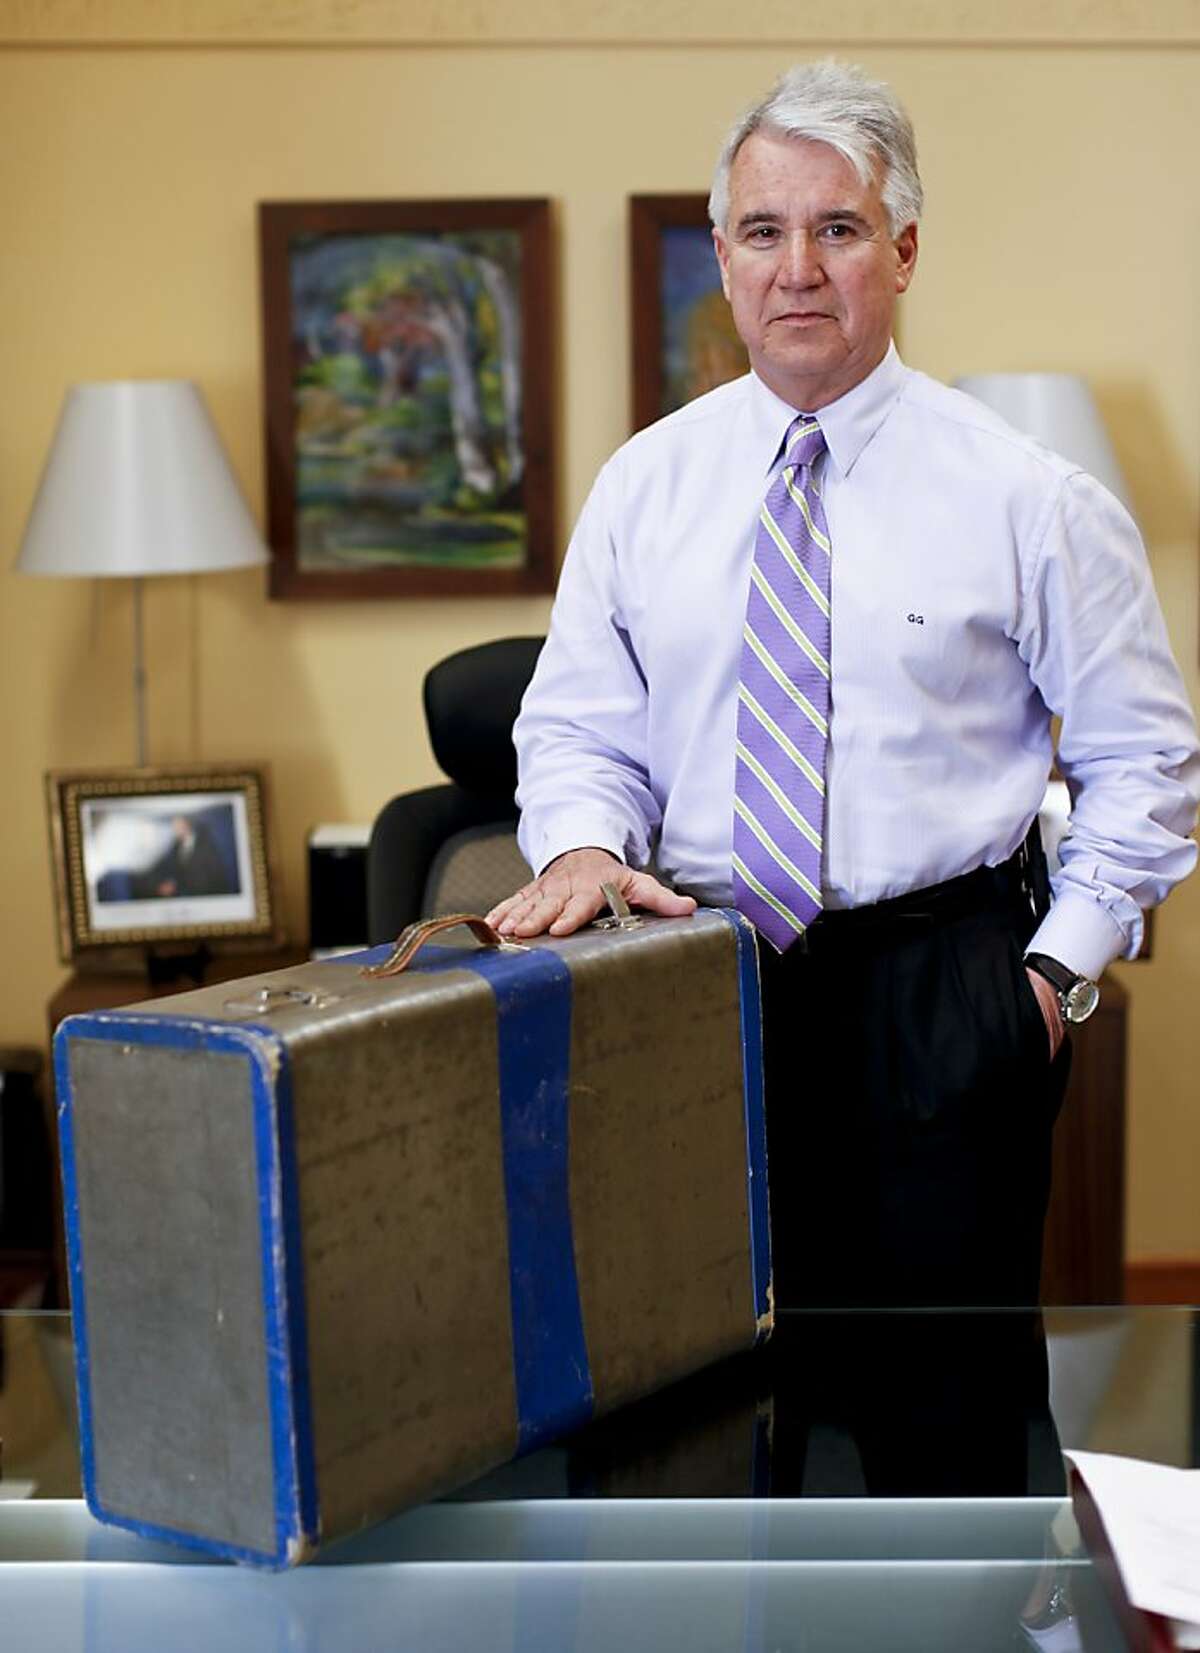 San Francisco District Attorney George Gascon is seen on Friday, March 22, 2013 at the Hall of Justice in San Francisco, Calif., with the suitcase that his family had when they fled Cuba in the 1960's.